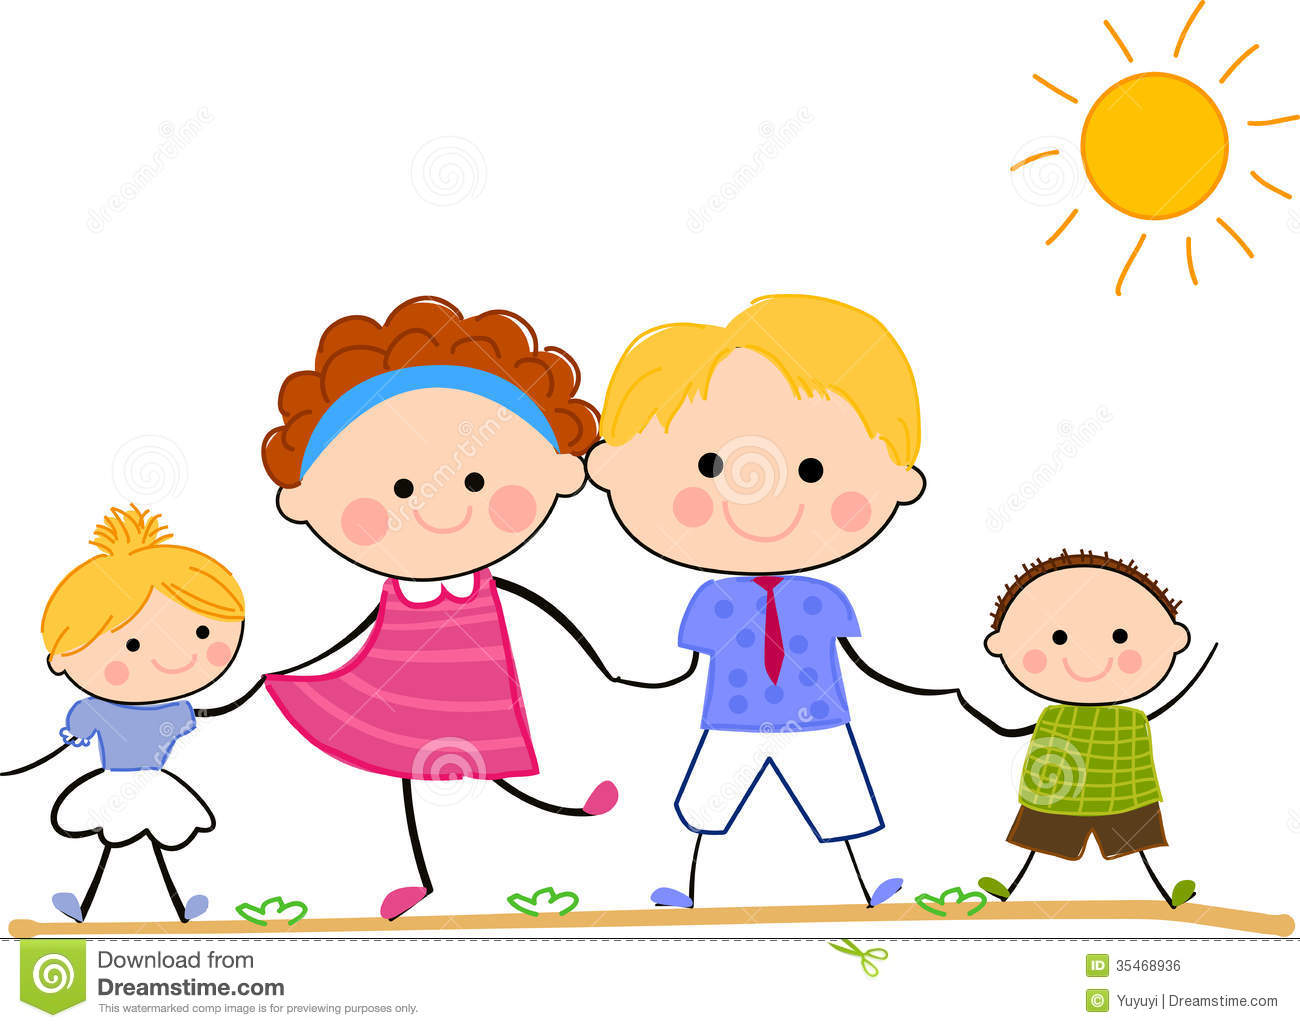 Happy Family Standing Together Royalty Free Stock Image   Image